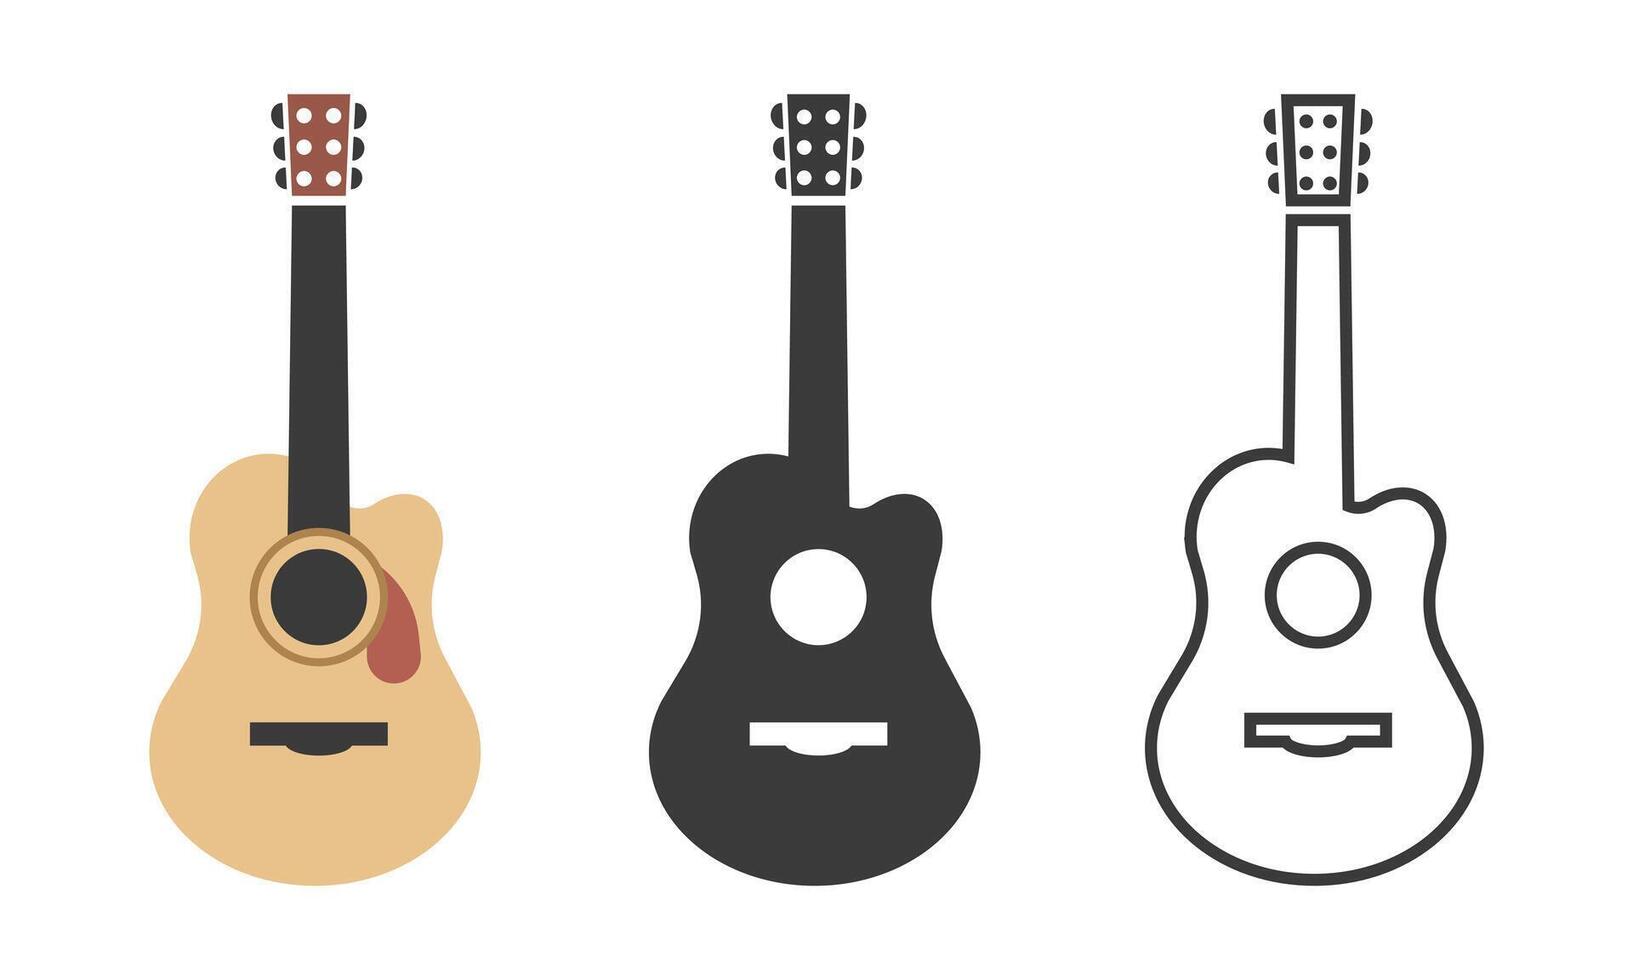 Acoustic guitar icon in different styles. Colored, black icon, and line icon. Guitar icon pictogram in flat, silhouette, linear style. Simple design sign, symbol, logo for music website, app vector